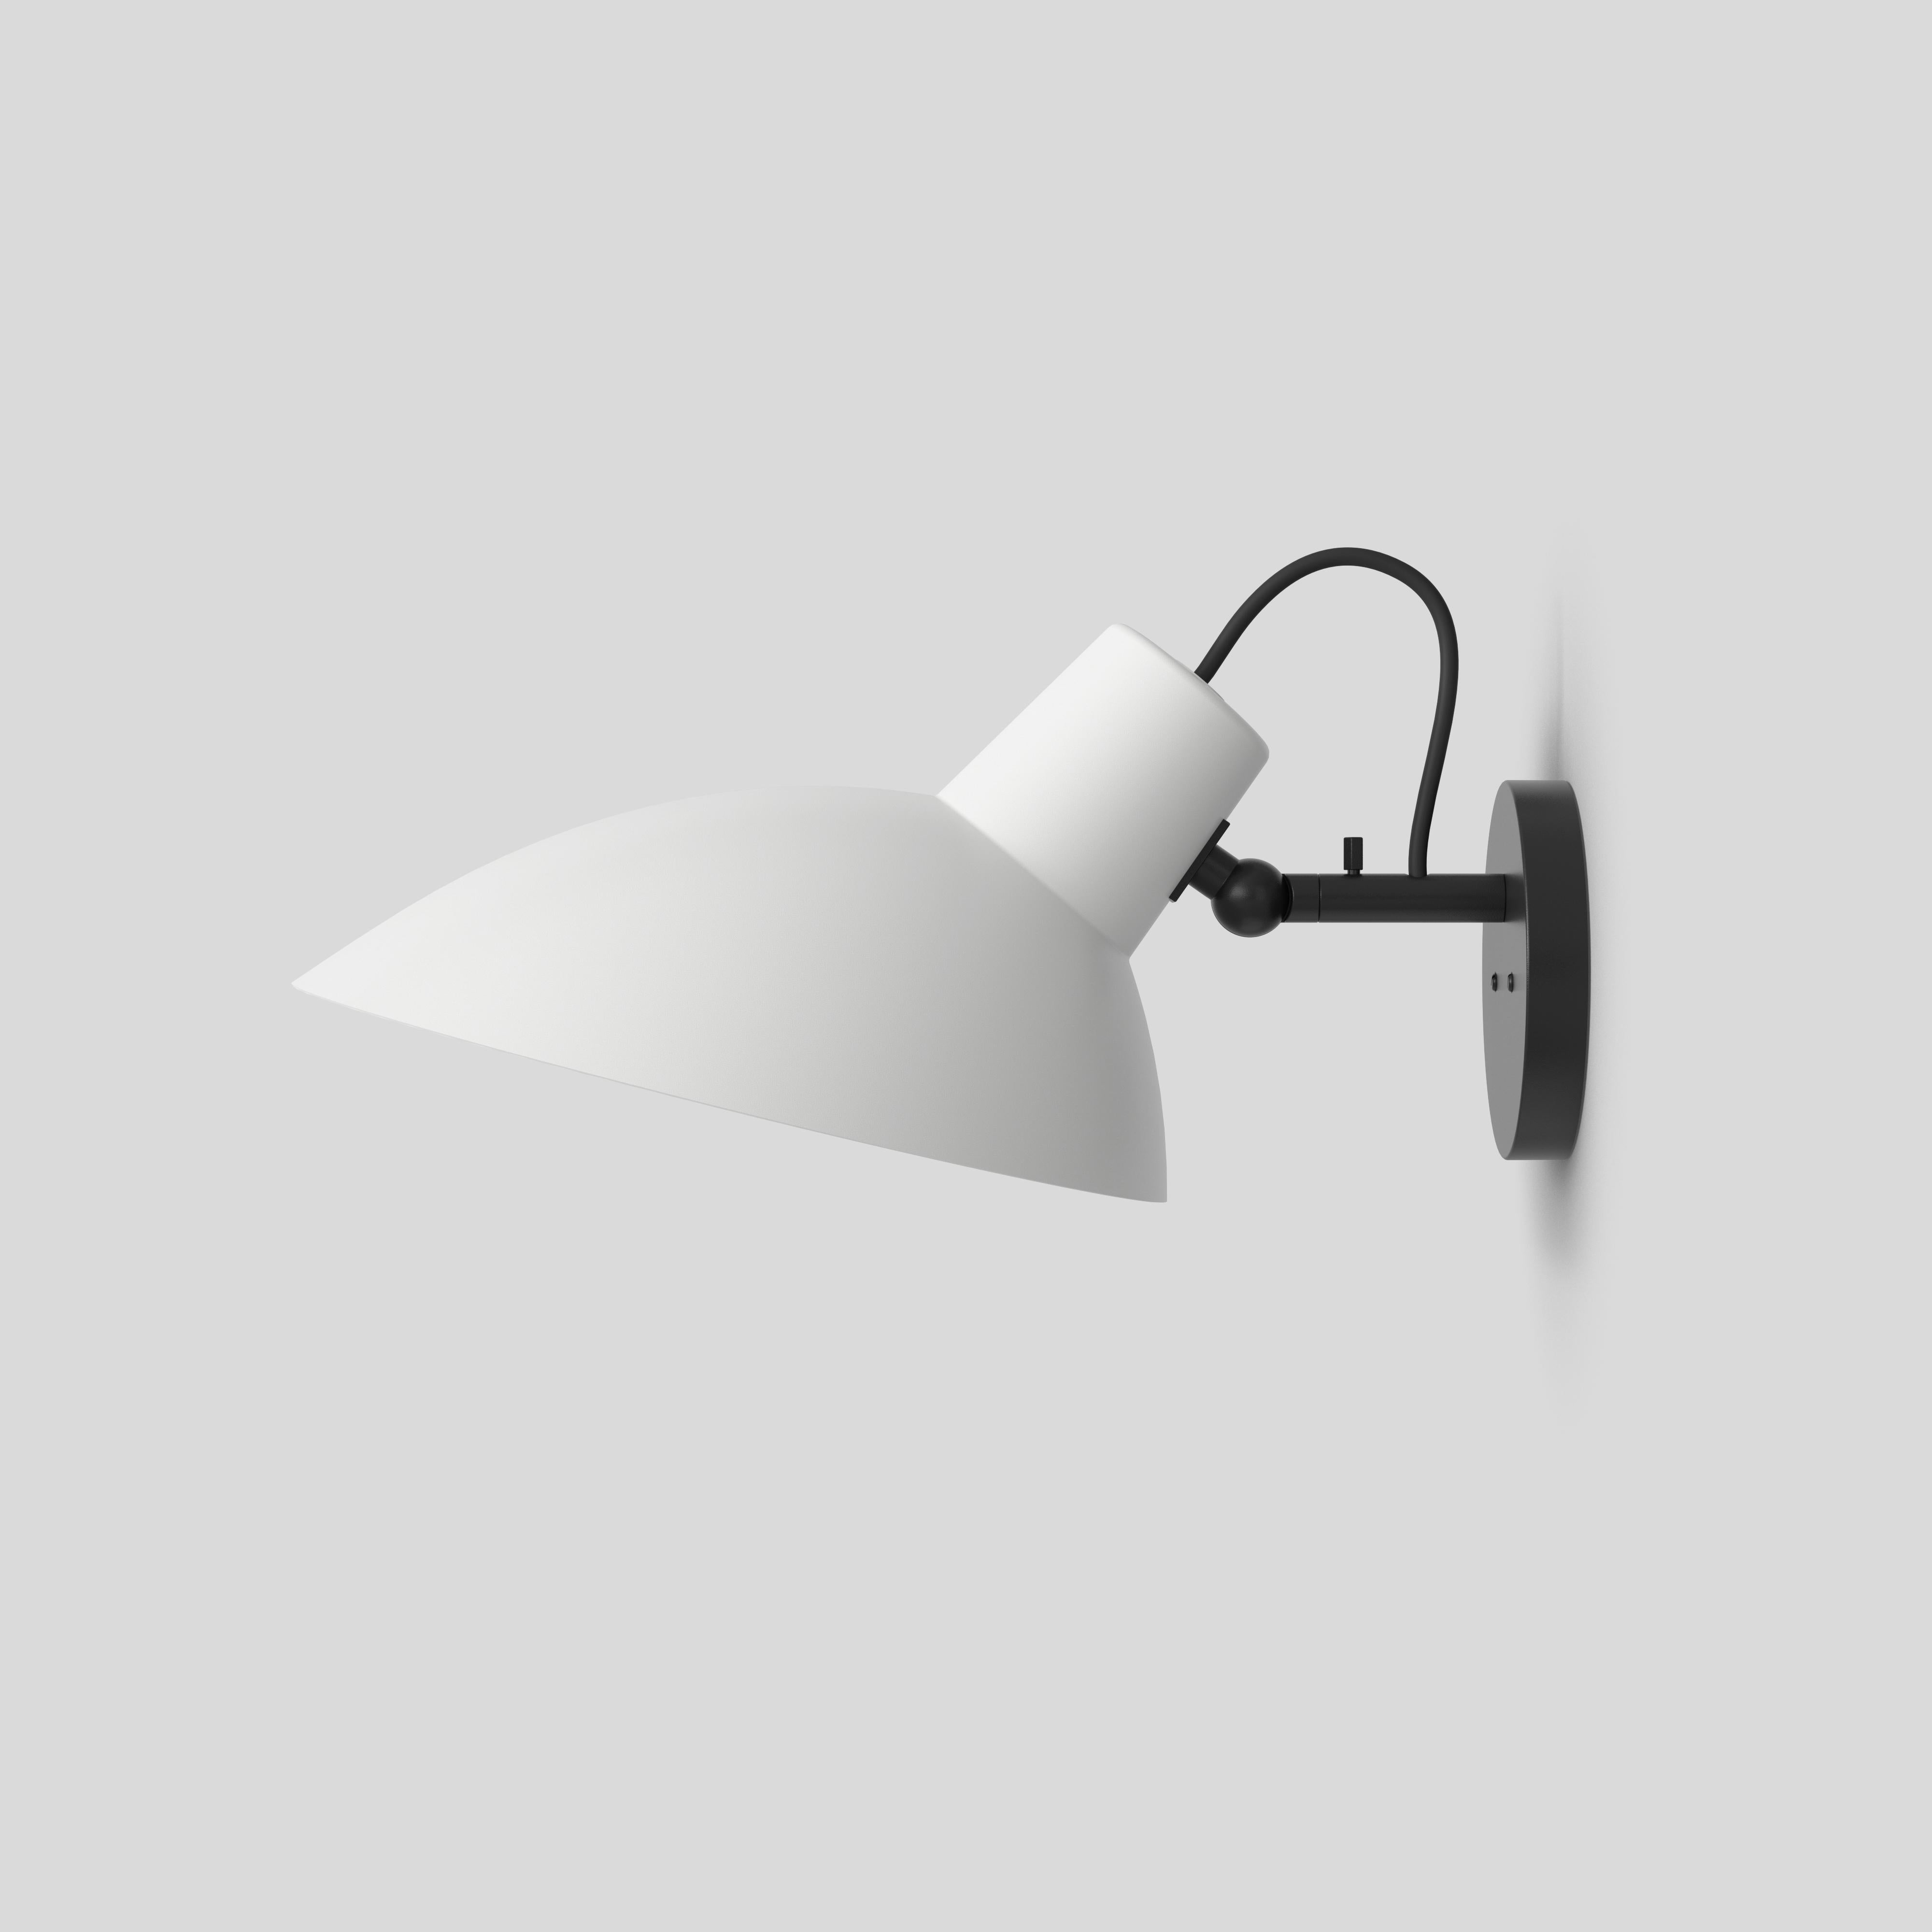 VV Cinquanta wall lamp
Design by Vittoriano Viganò
This version is with White Lacquered Reflector and Black Mount.

The VV Cinquanta features an elegant and versatile posable direct light source that can swivel and tilt. The Wall model is mounted on